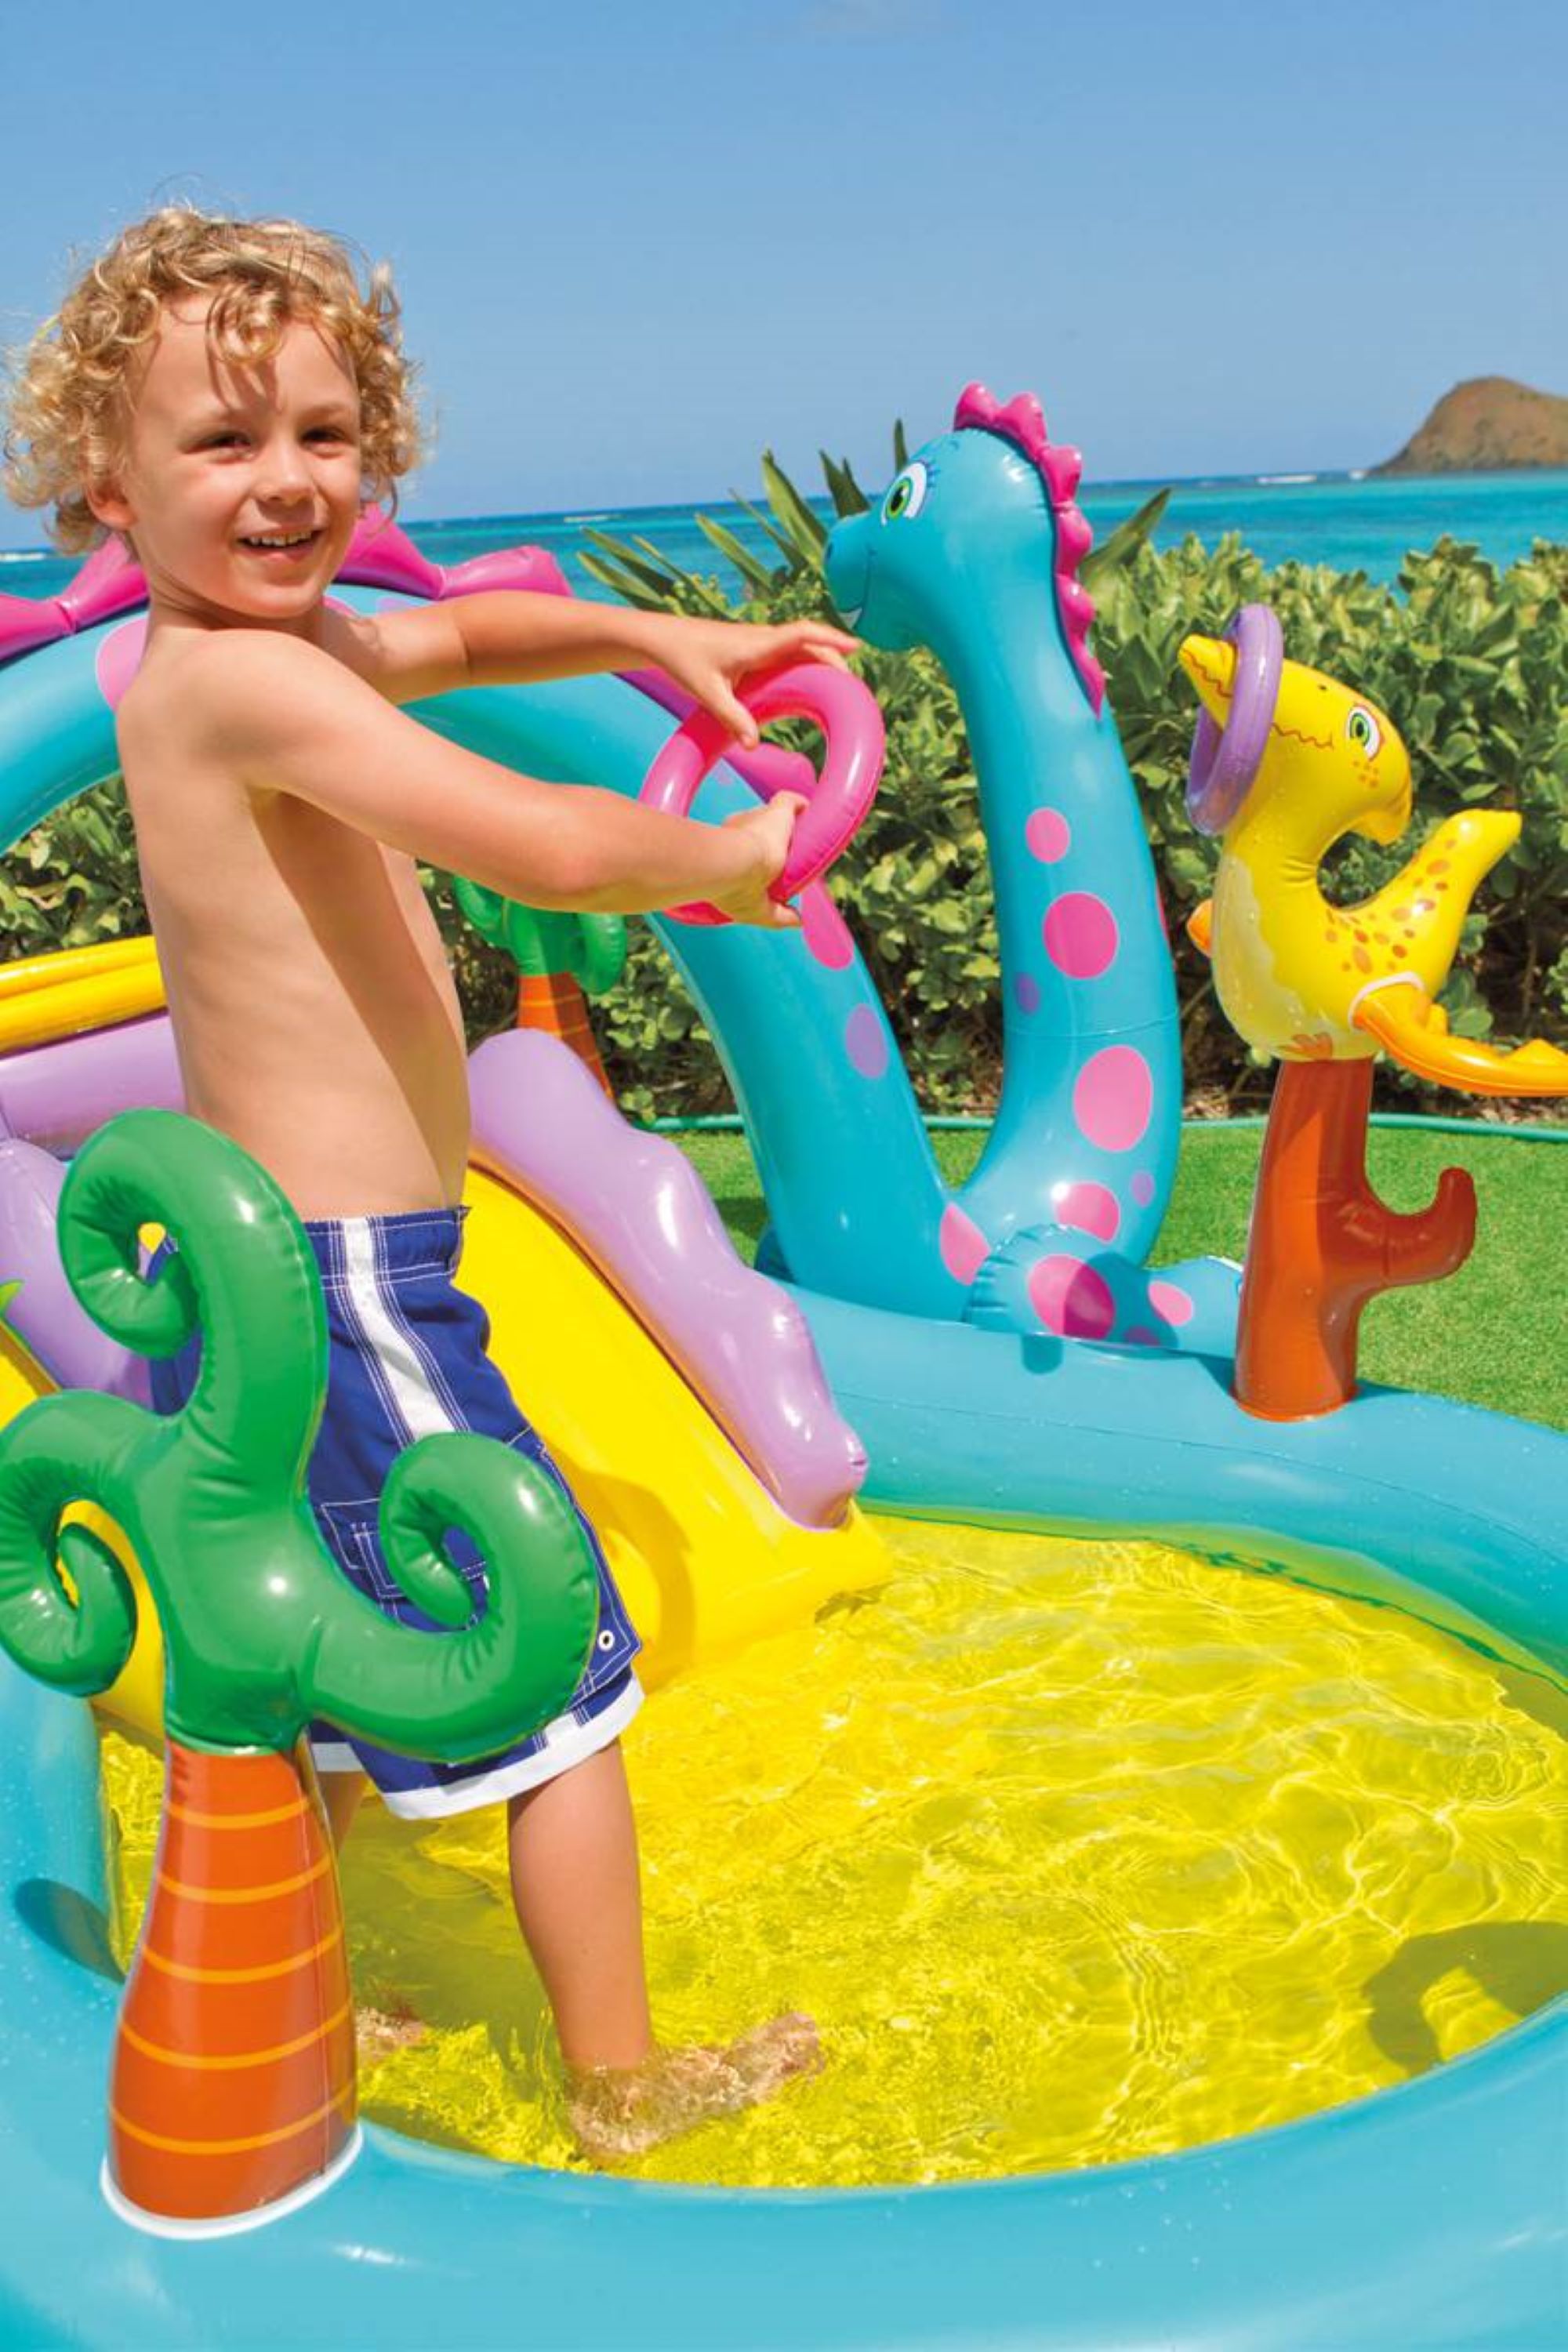 Intex 11ft x 7.5ft x 44in Dinoland Play Center Kiddie Inflatable Swimming Pool - image 5 of 6